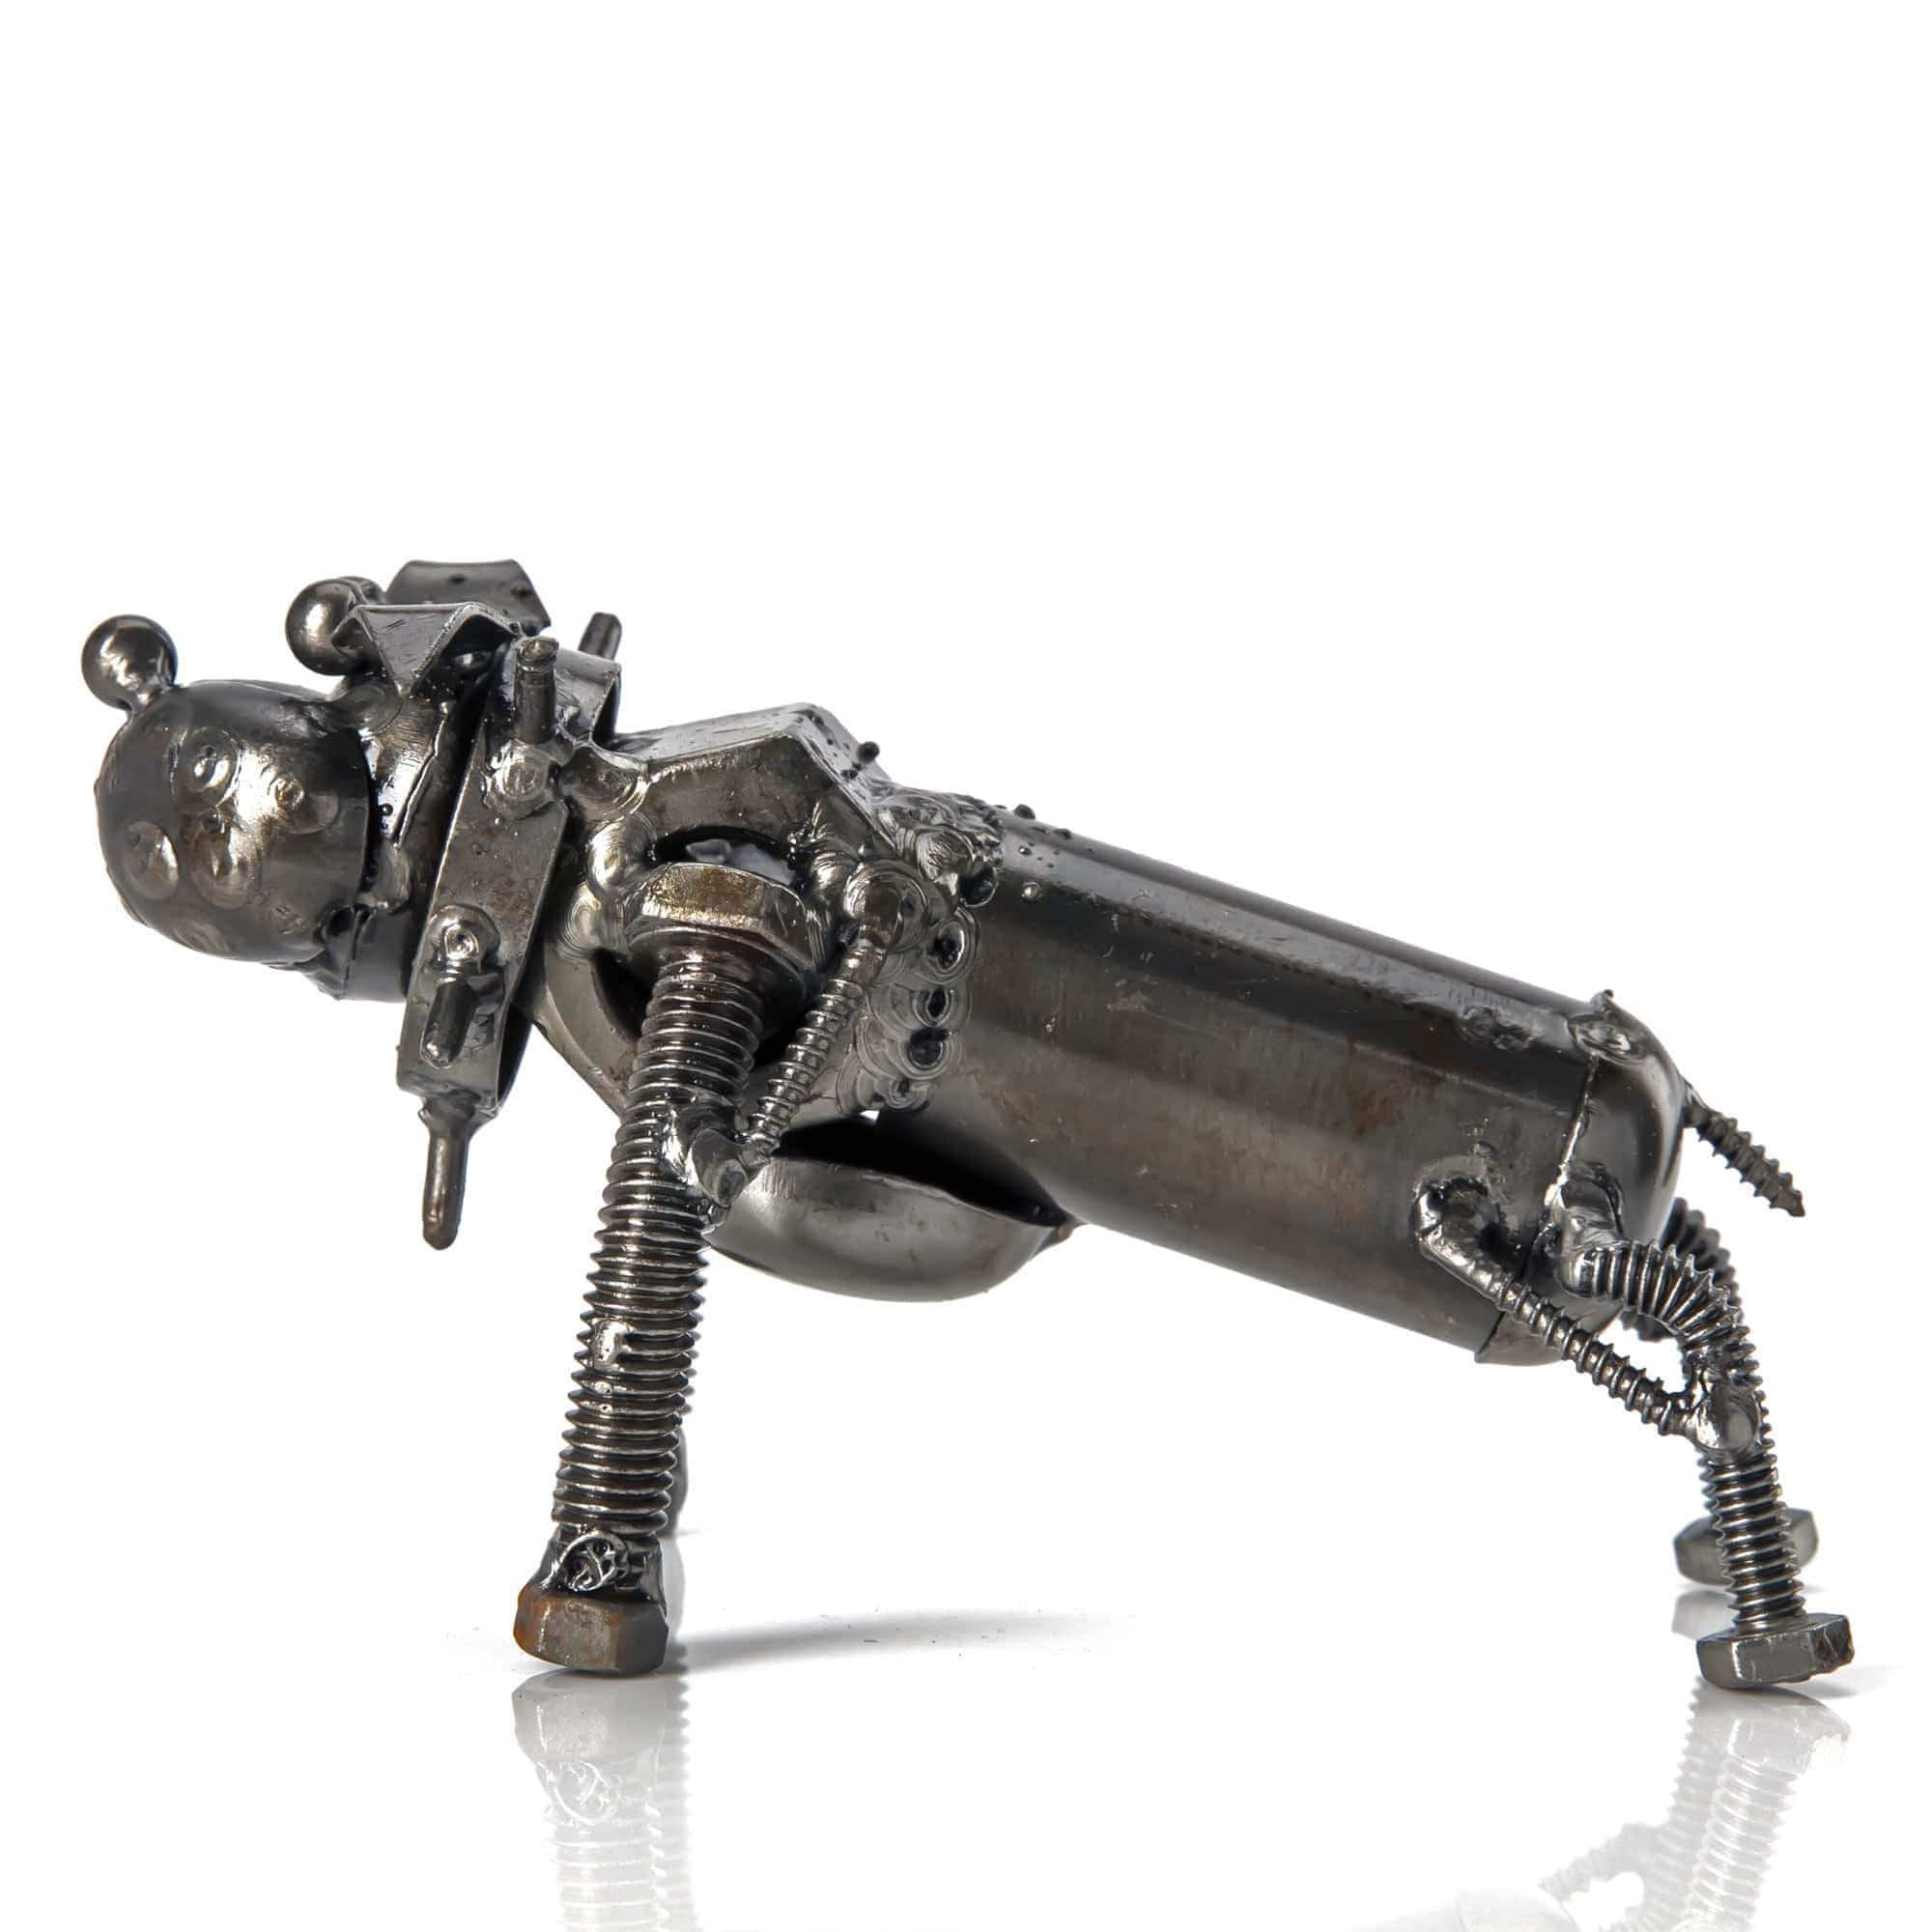 Kalifano Recycled Metal Art Bull Dog Inspired Recycled Metal Sculpture RMS-150DOG-N